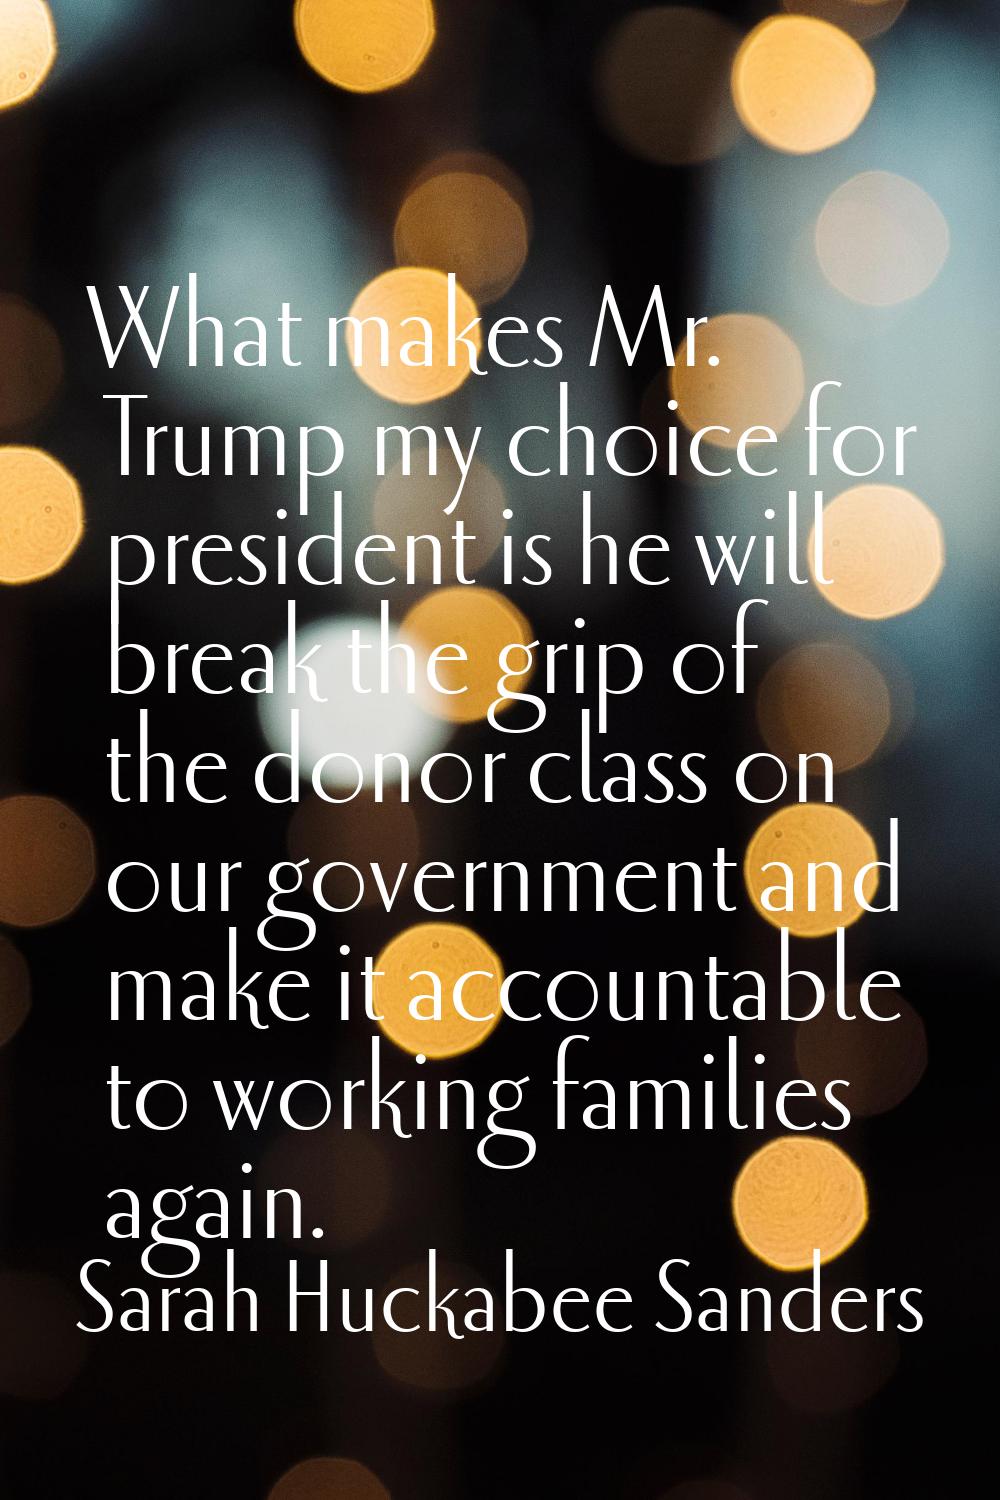 What makes Mr. Trump my choice for president is he will break the grip of the donor class on our go